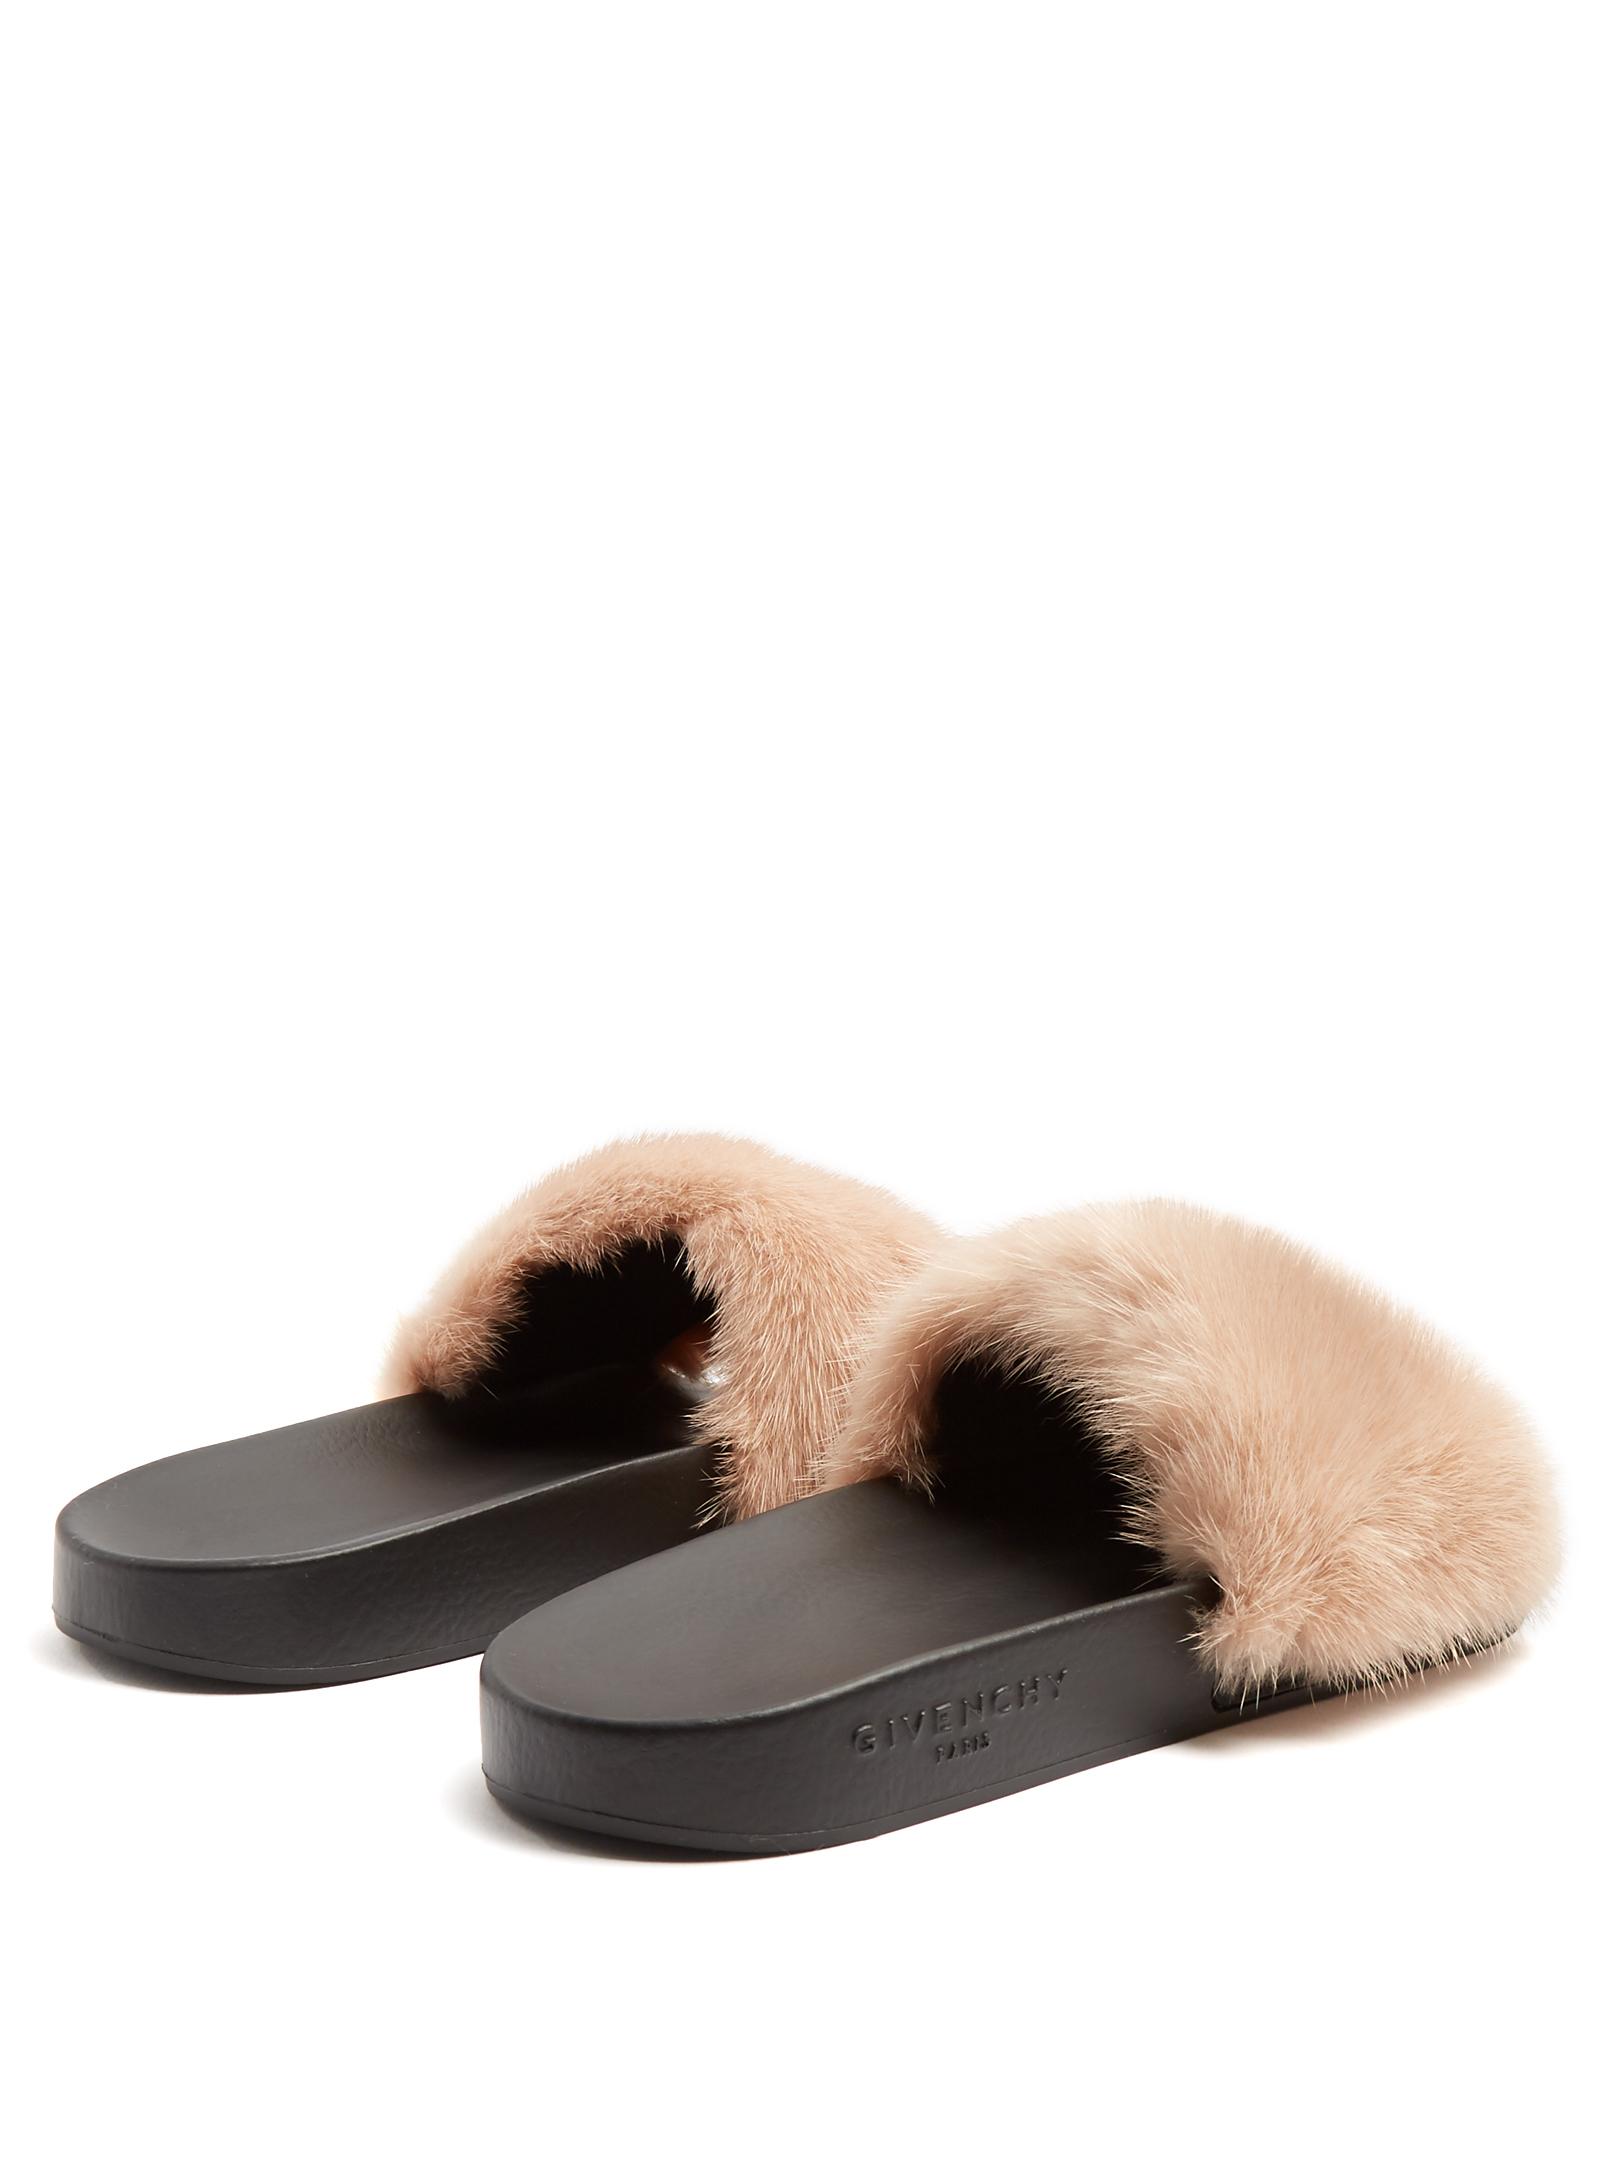 givenchy slides nude